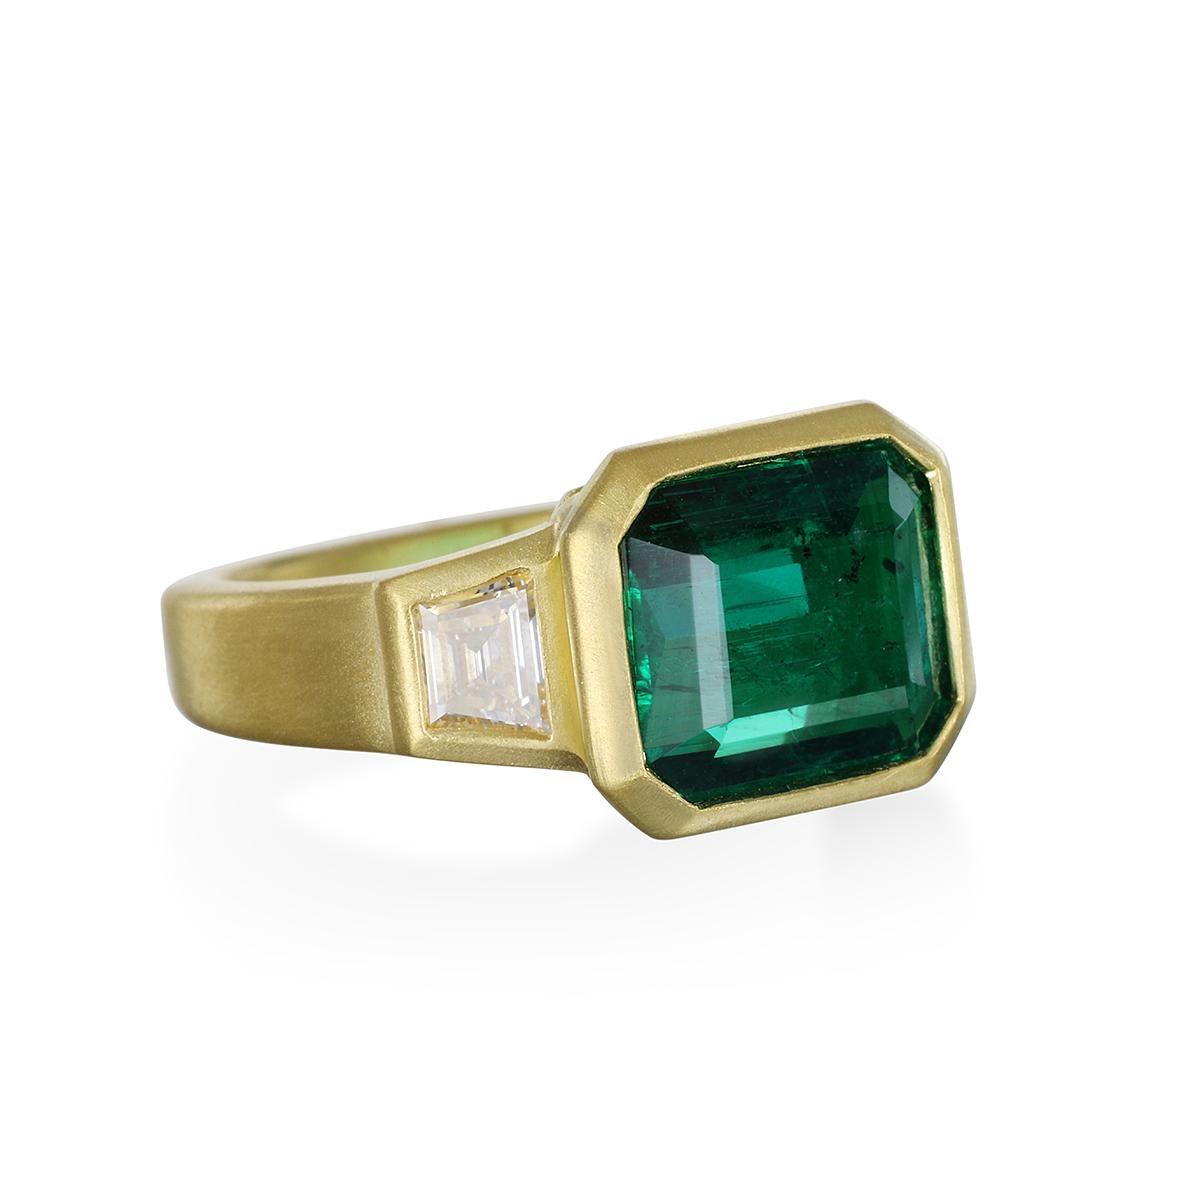 Make a statement with this exquisite 3-stone Brazilian Emerald Ring.  Flanked by trapezoid diamonds in 18k matte gold*, it's perfect as a right-hand statement ring or an engagement ring. 

*In designer Faye Kim's signature 18k green gold, an alloy